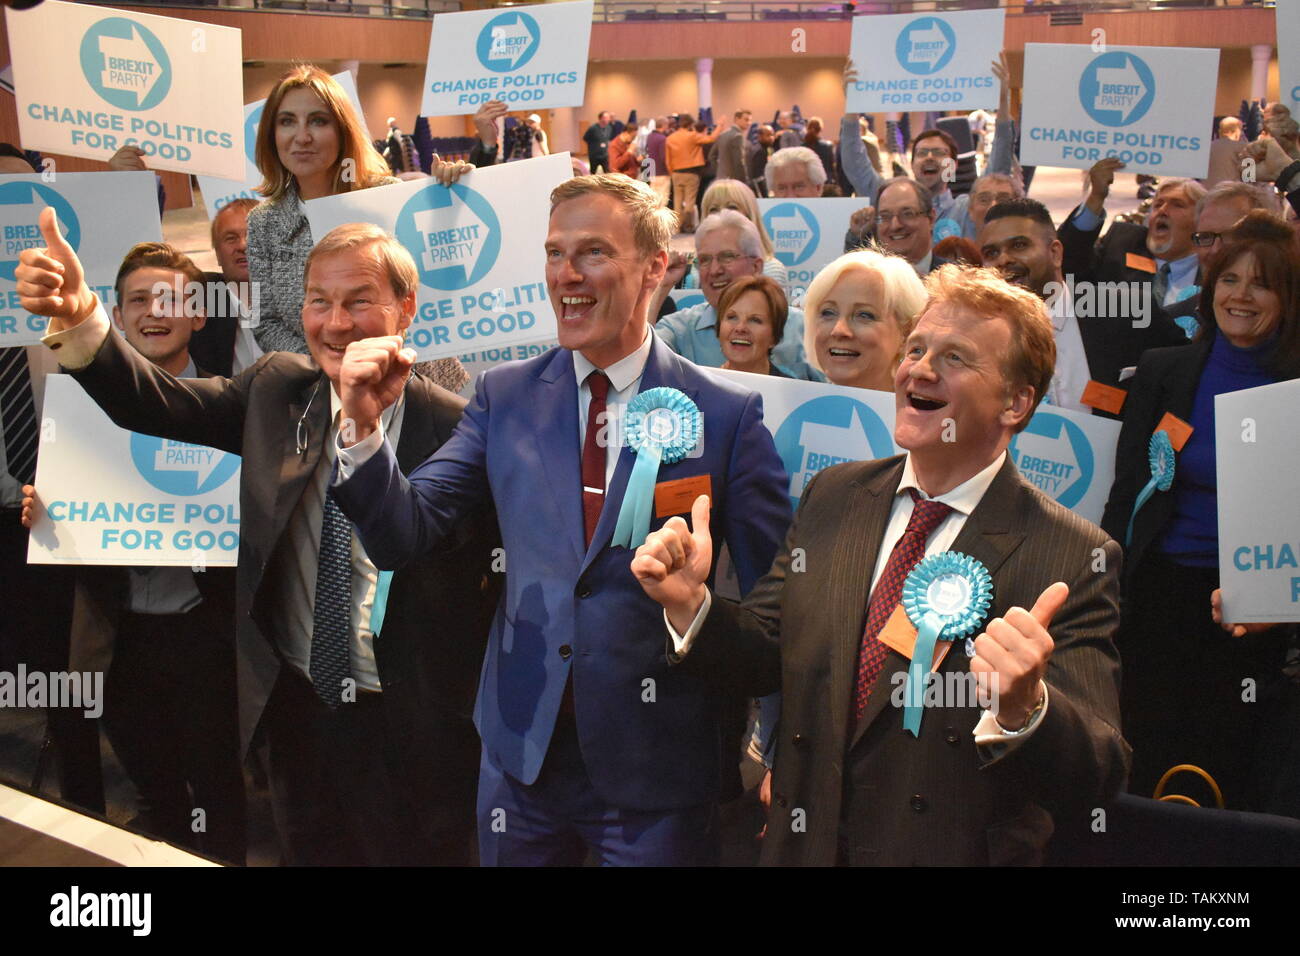 The Brexit Party's three winning candidates in the West Midlands region - Rupert Lowe, Martin Daubney and Andrew Kerr - pose for pictures alongside supporters at Birmingham's International Convention Centre. Stock Photo